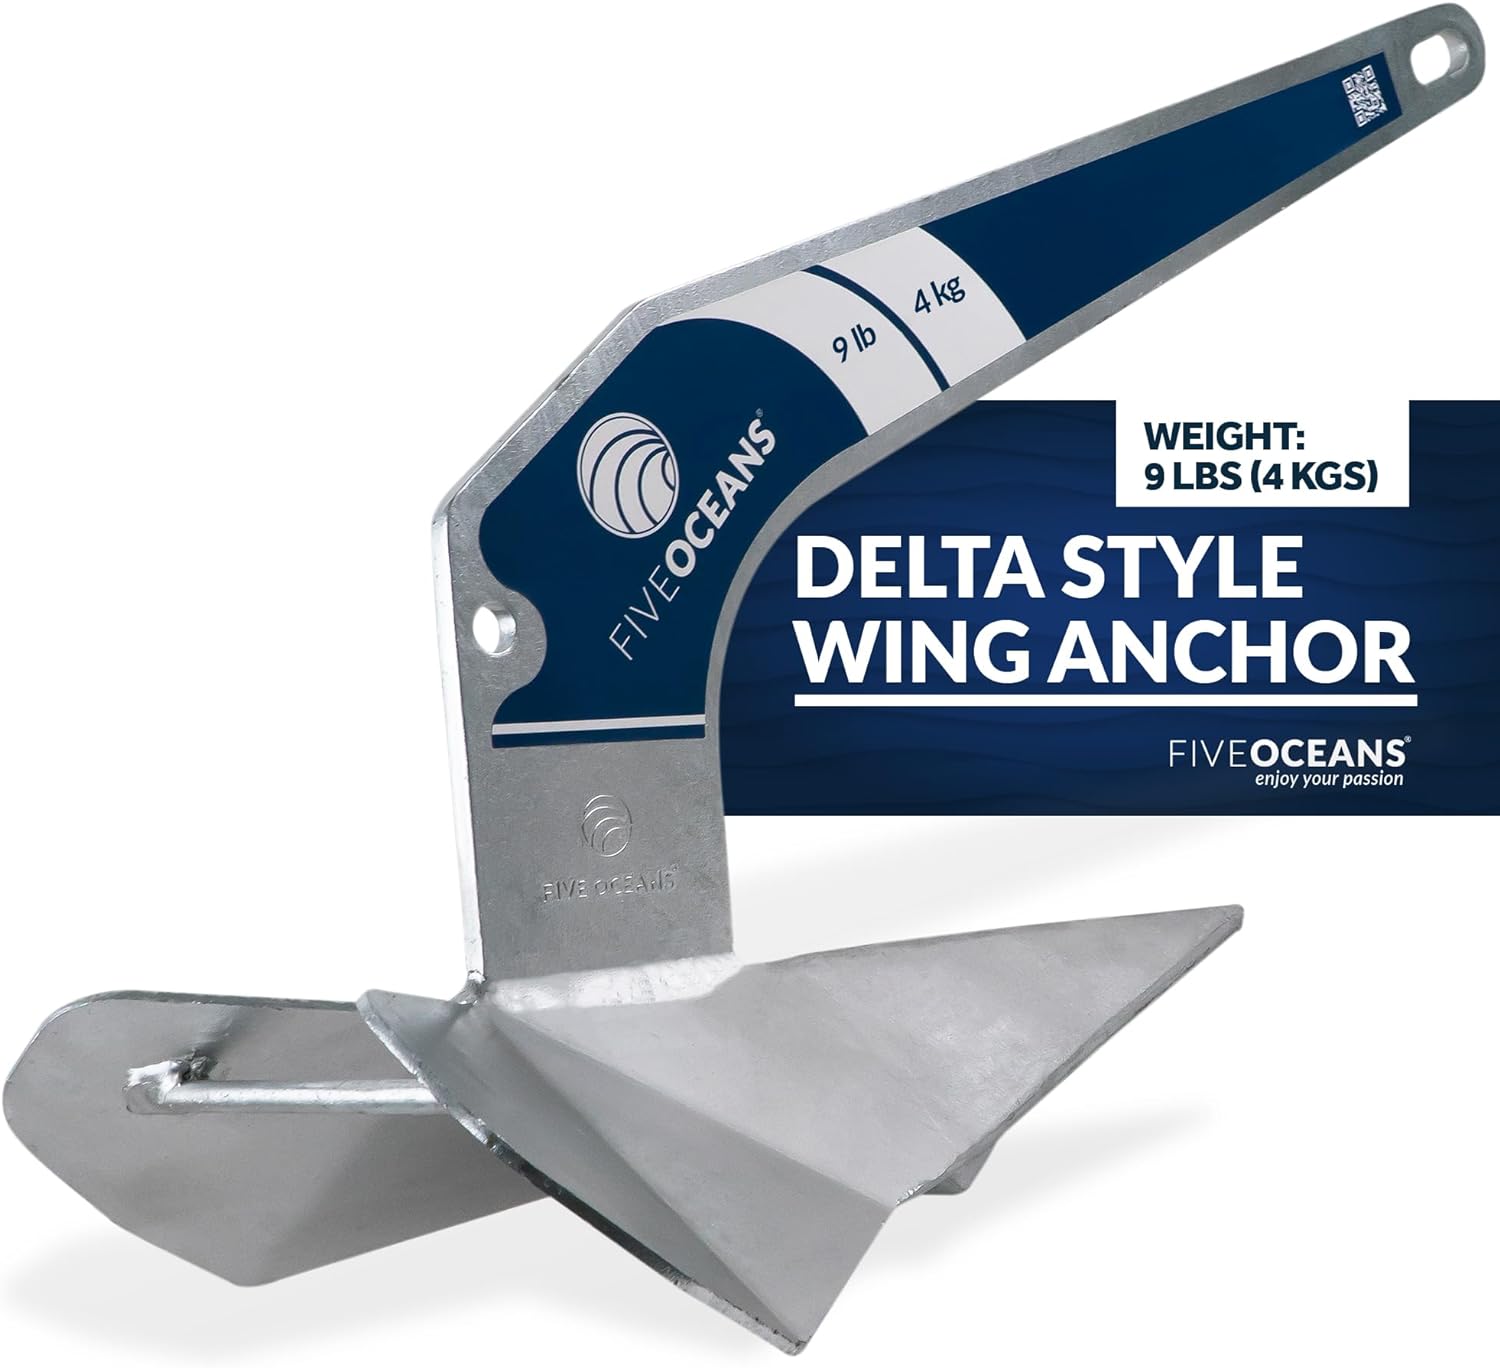 Five Oceans Delta Style Wing Anchor, Boat Anchor, Premium Series, for Pontoon, Fishing Boats, Sport Boats, Sailboats